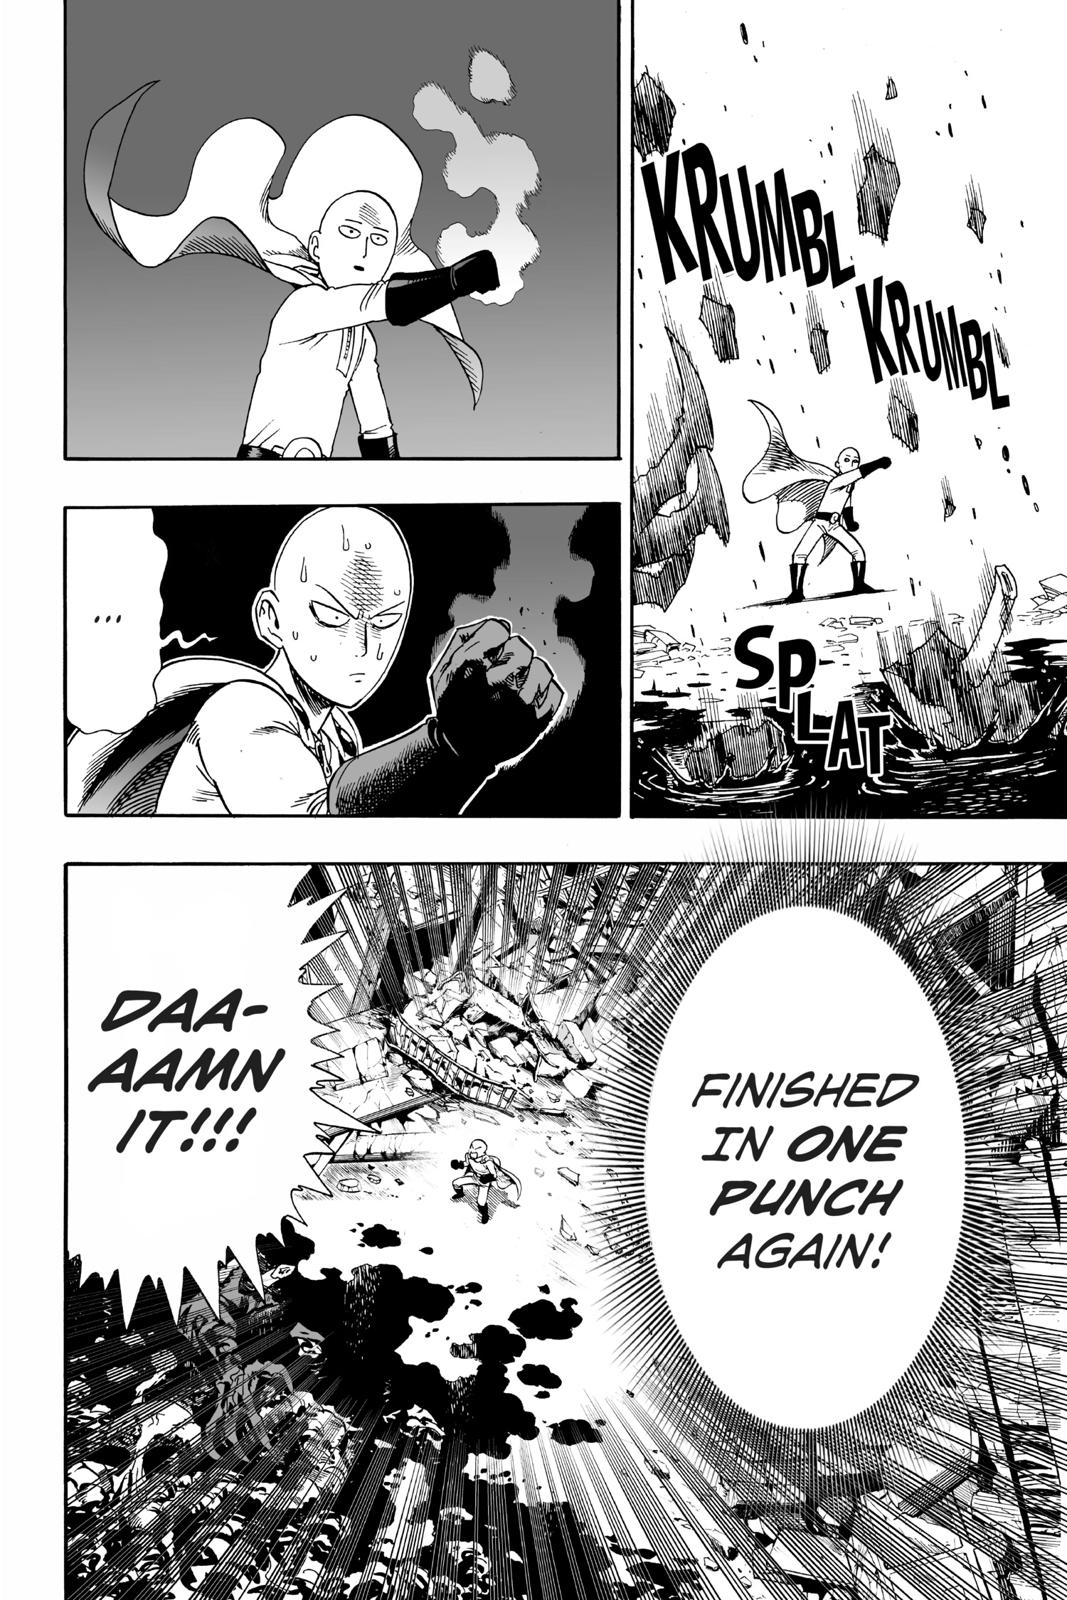 One-Punch Man, Punch 1 image 23